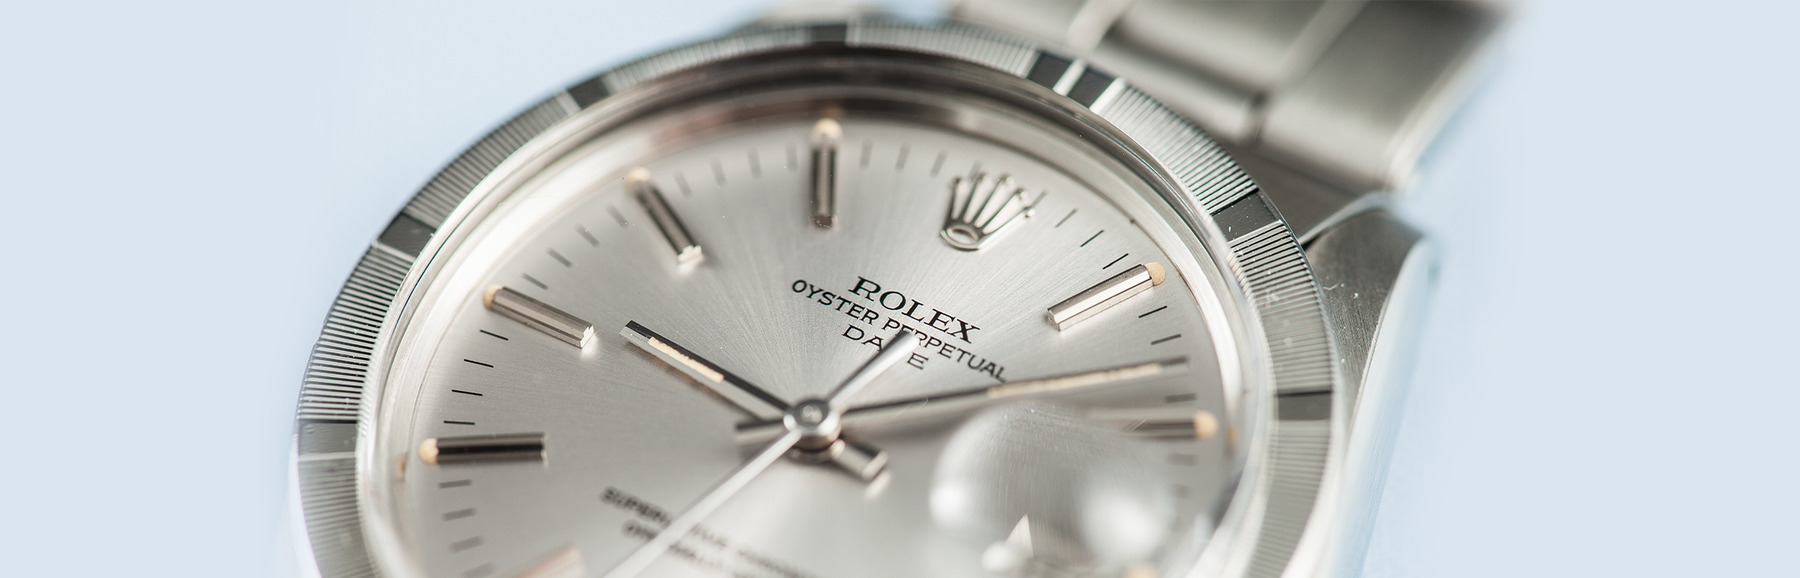 Cheapest Rolex watches